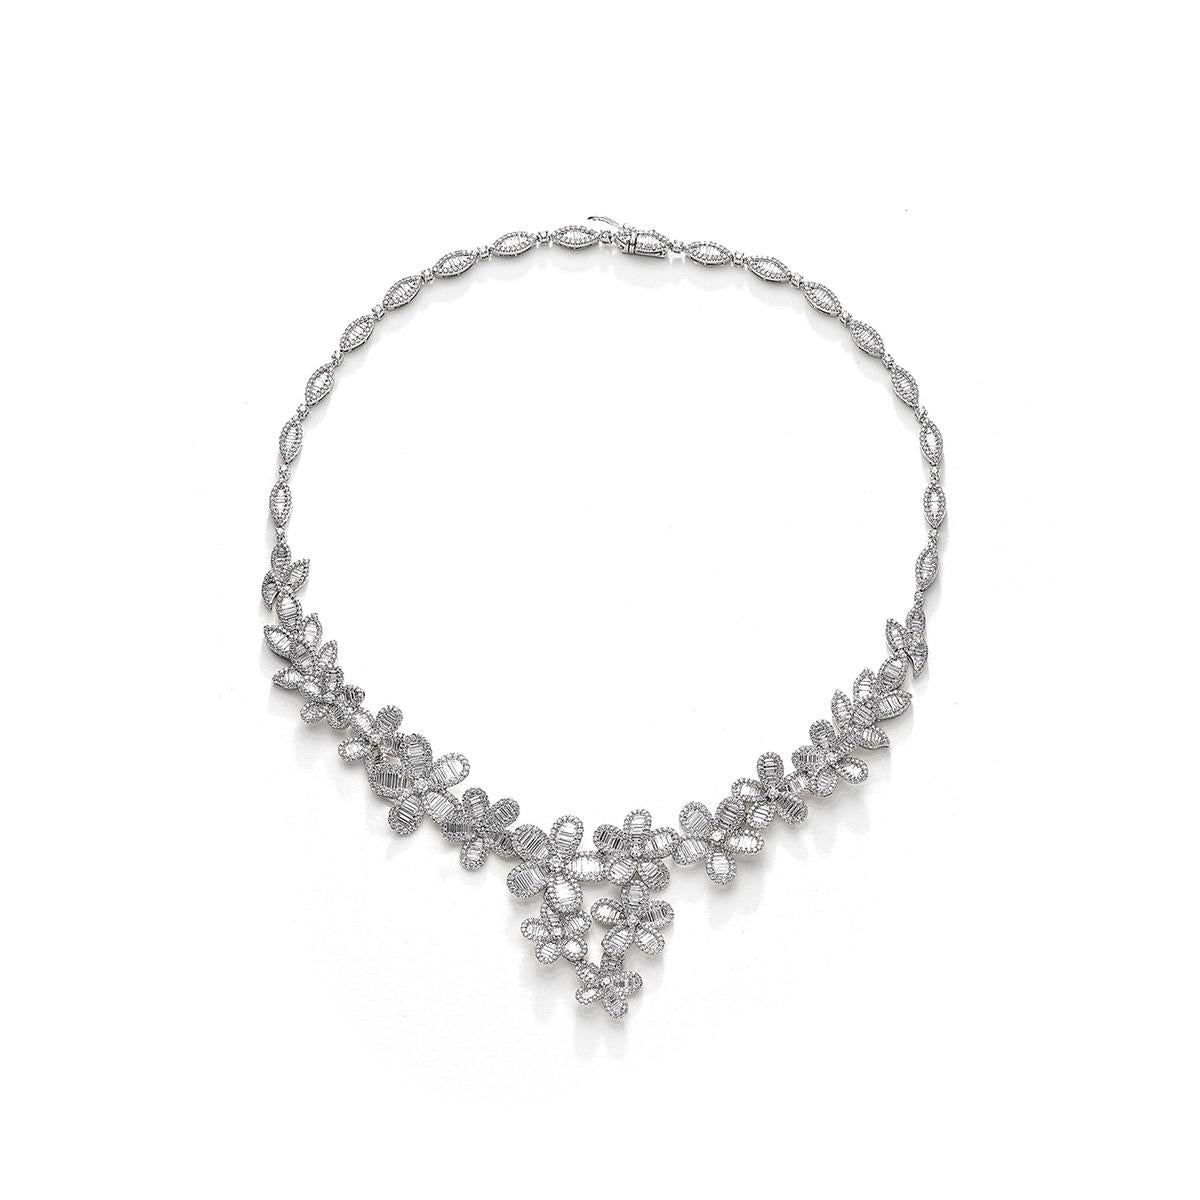 Necklace in 18kt white gold set with 697 baguette cut diamonds 9.04 cts and 1453 diamonds 7.42 cts.